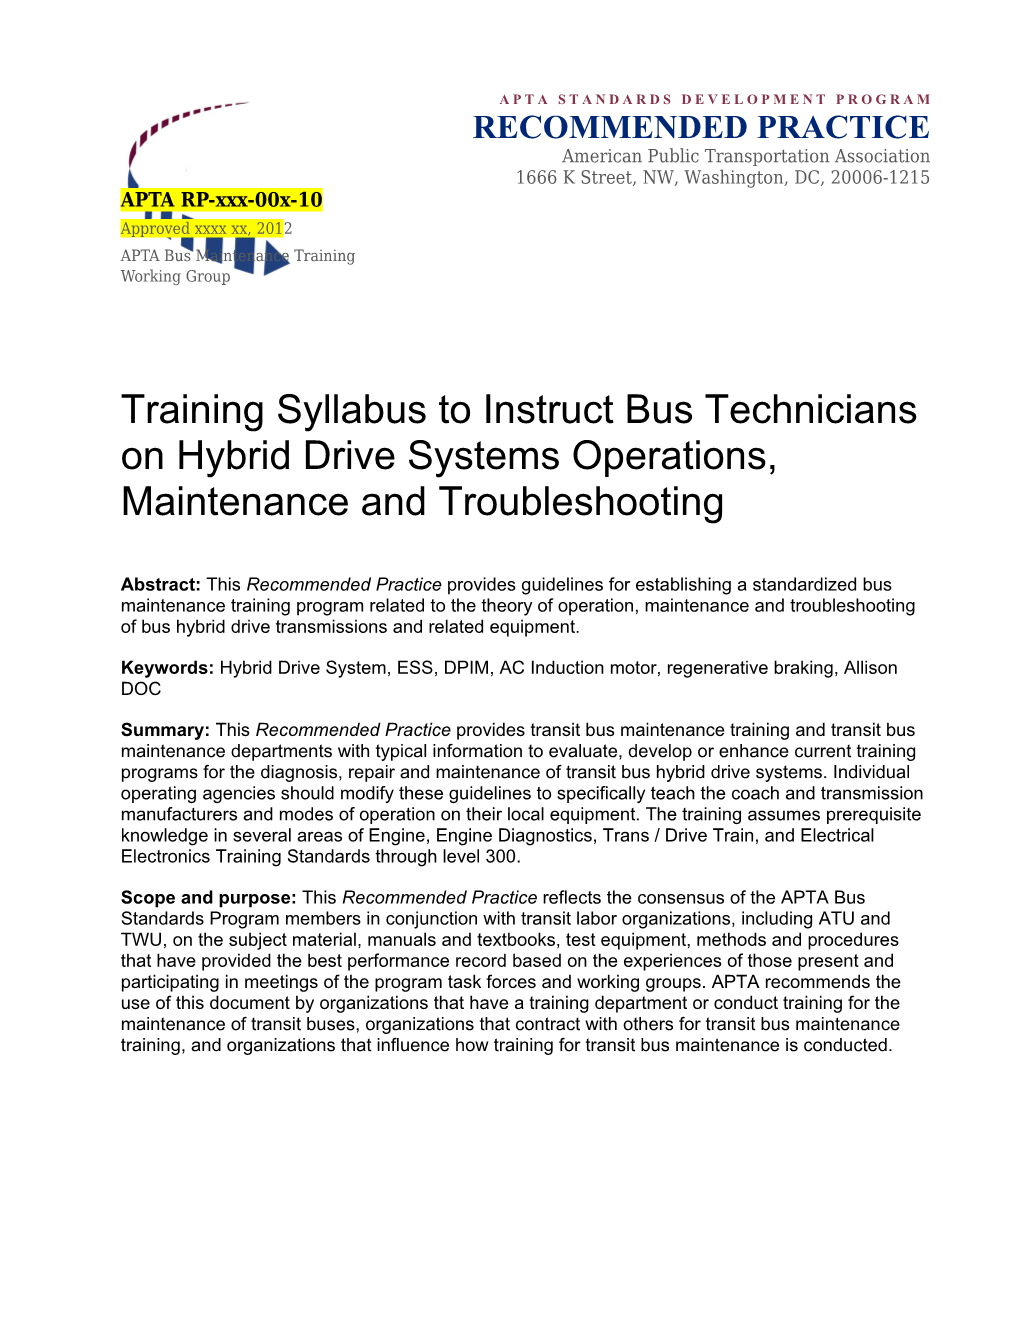 Training Syllabus to Instruct Bus Technicians on Hybrid Drive Systems Operations, Maintenance